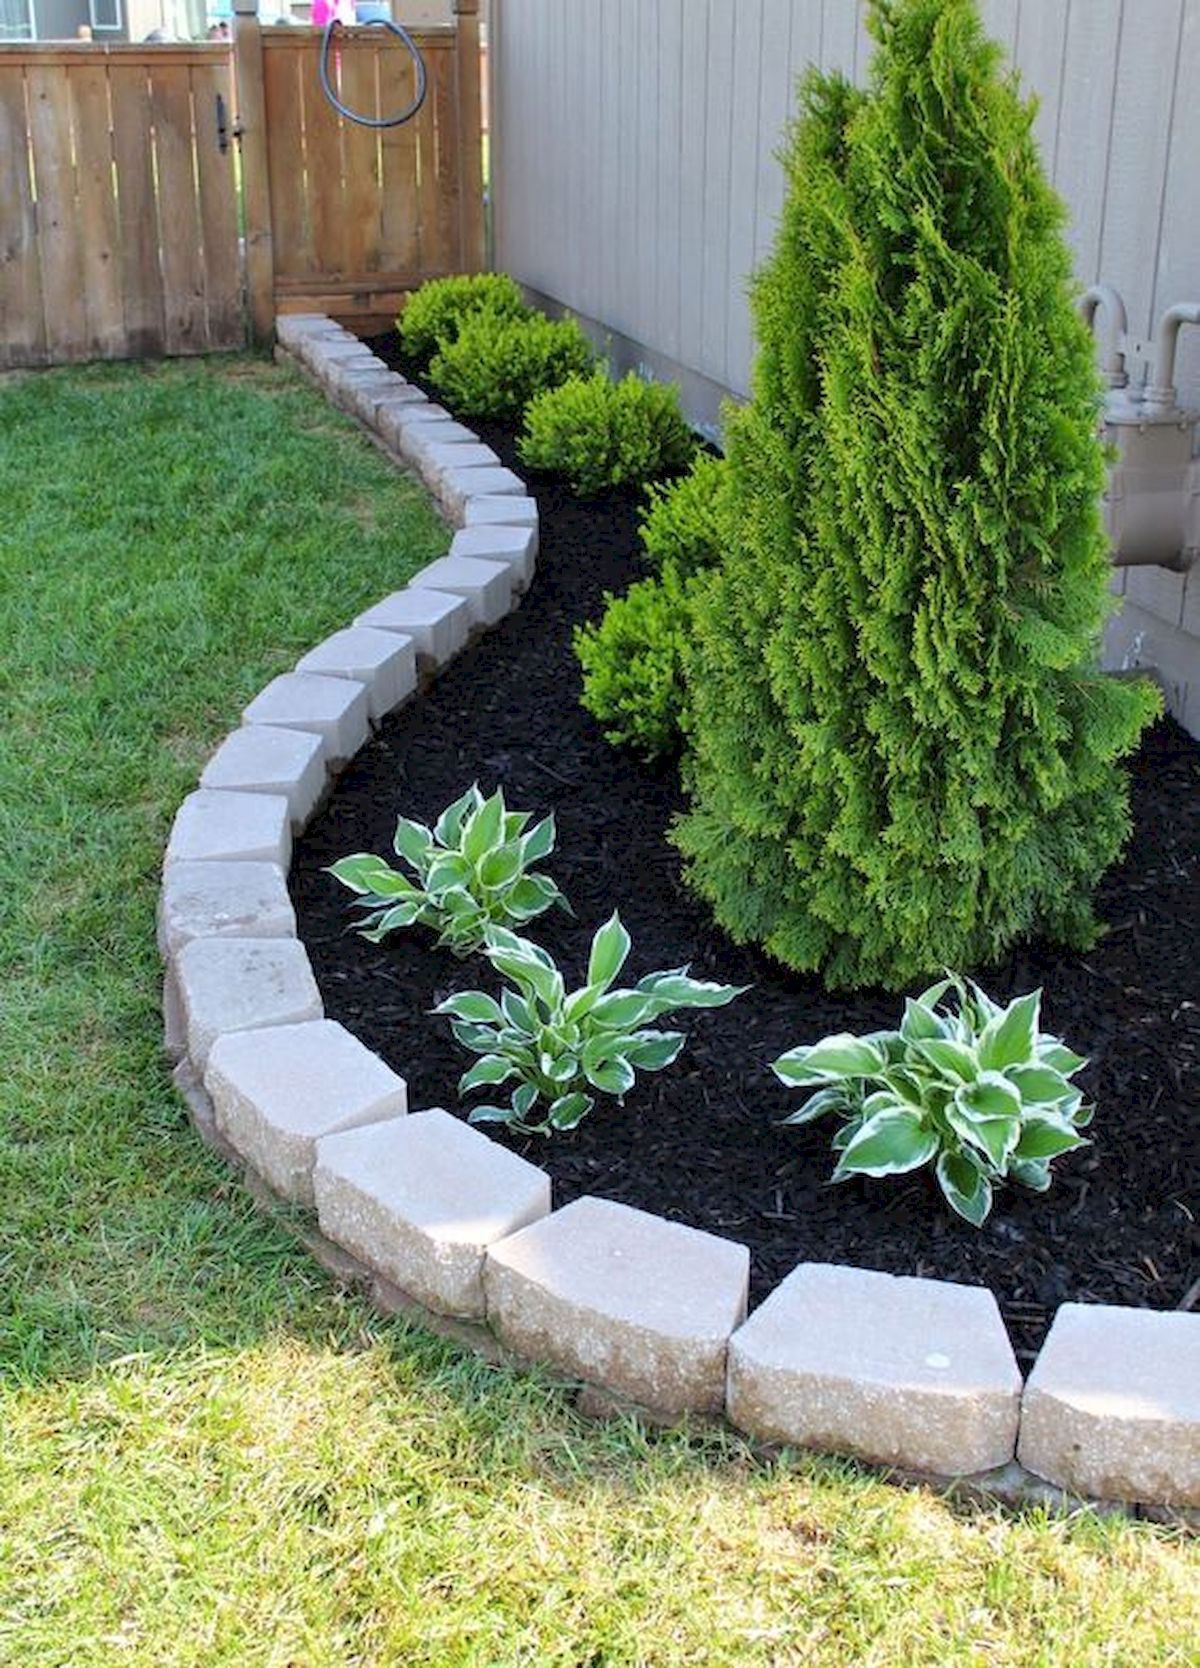 Garden Edging Ideas That Will Inspire You     to Spruce Up Your Yard